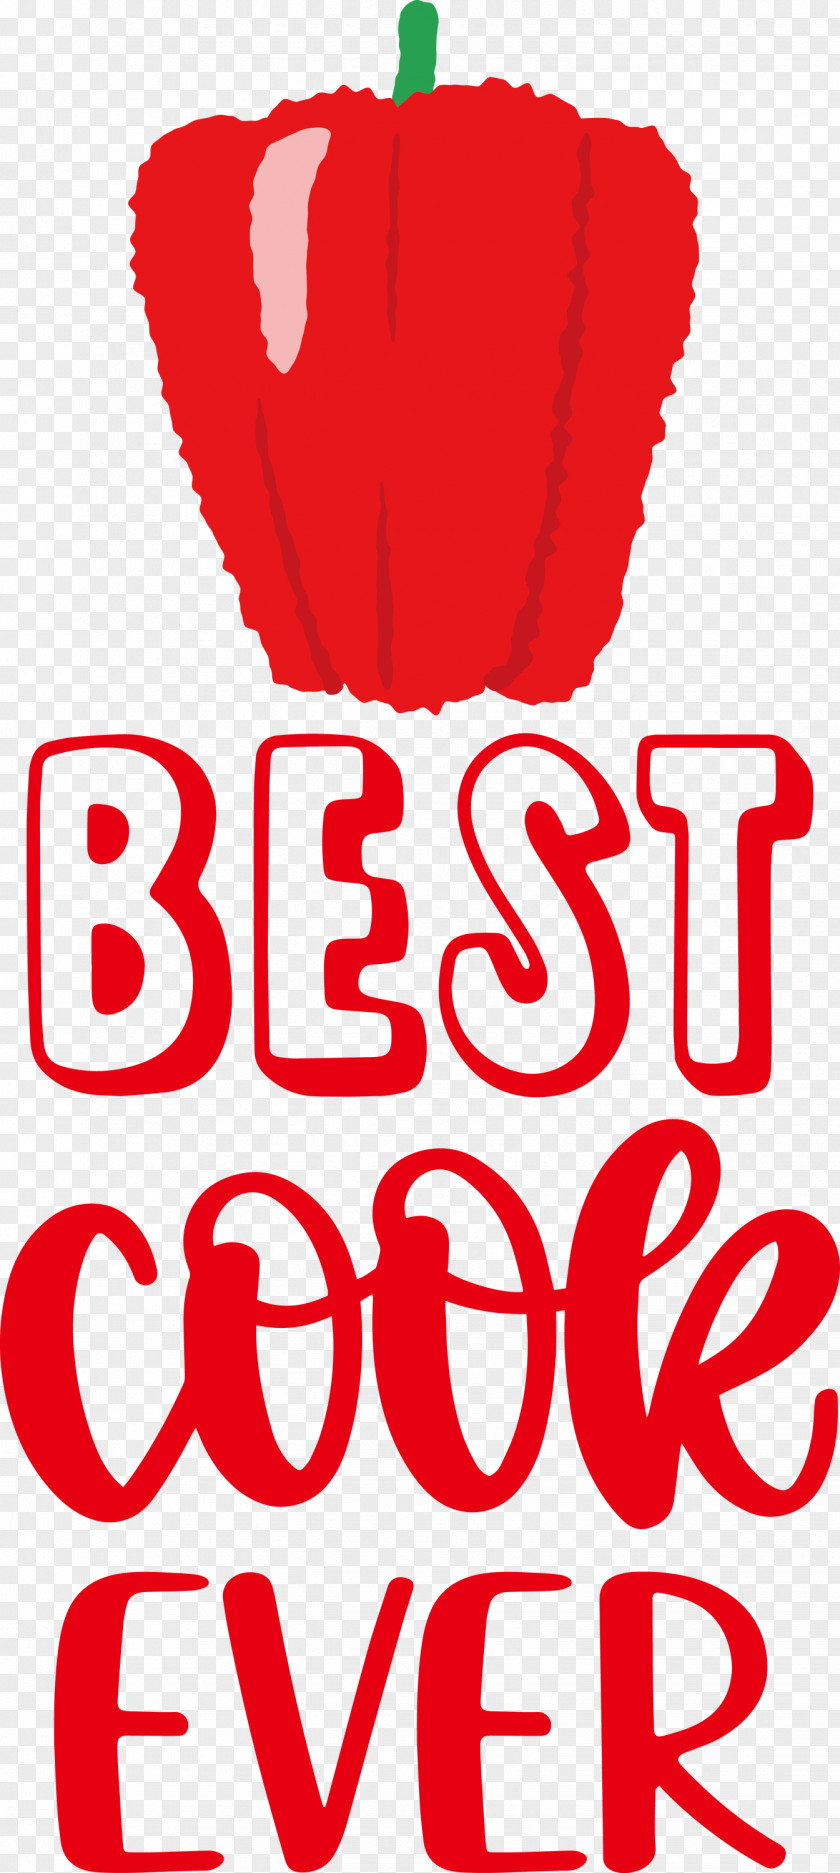 Best Cook Ever Food Kitchen PNG